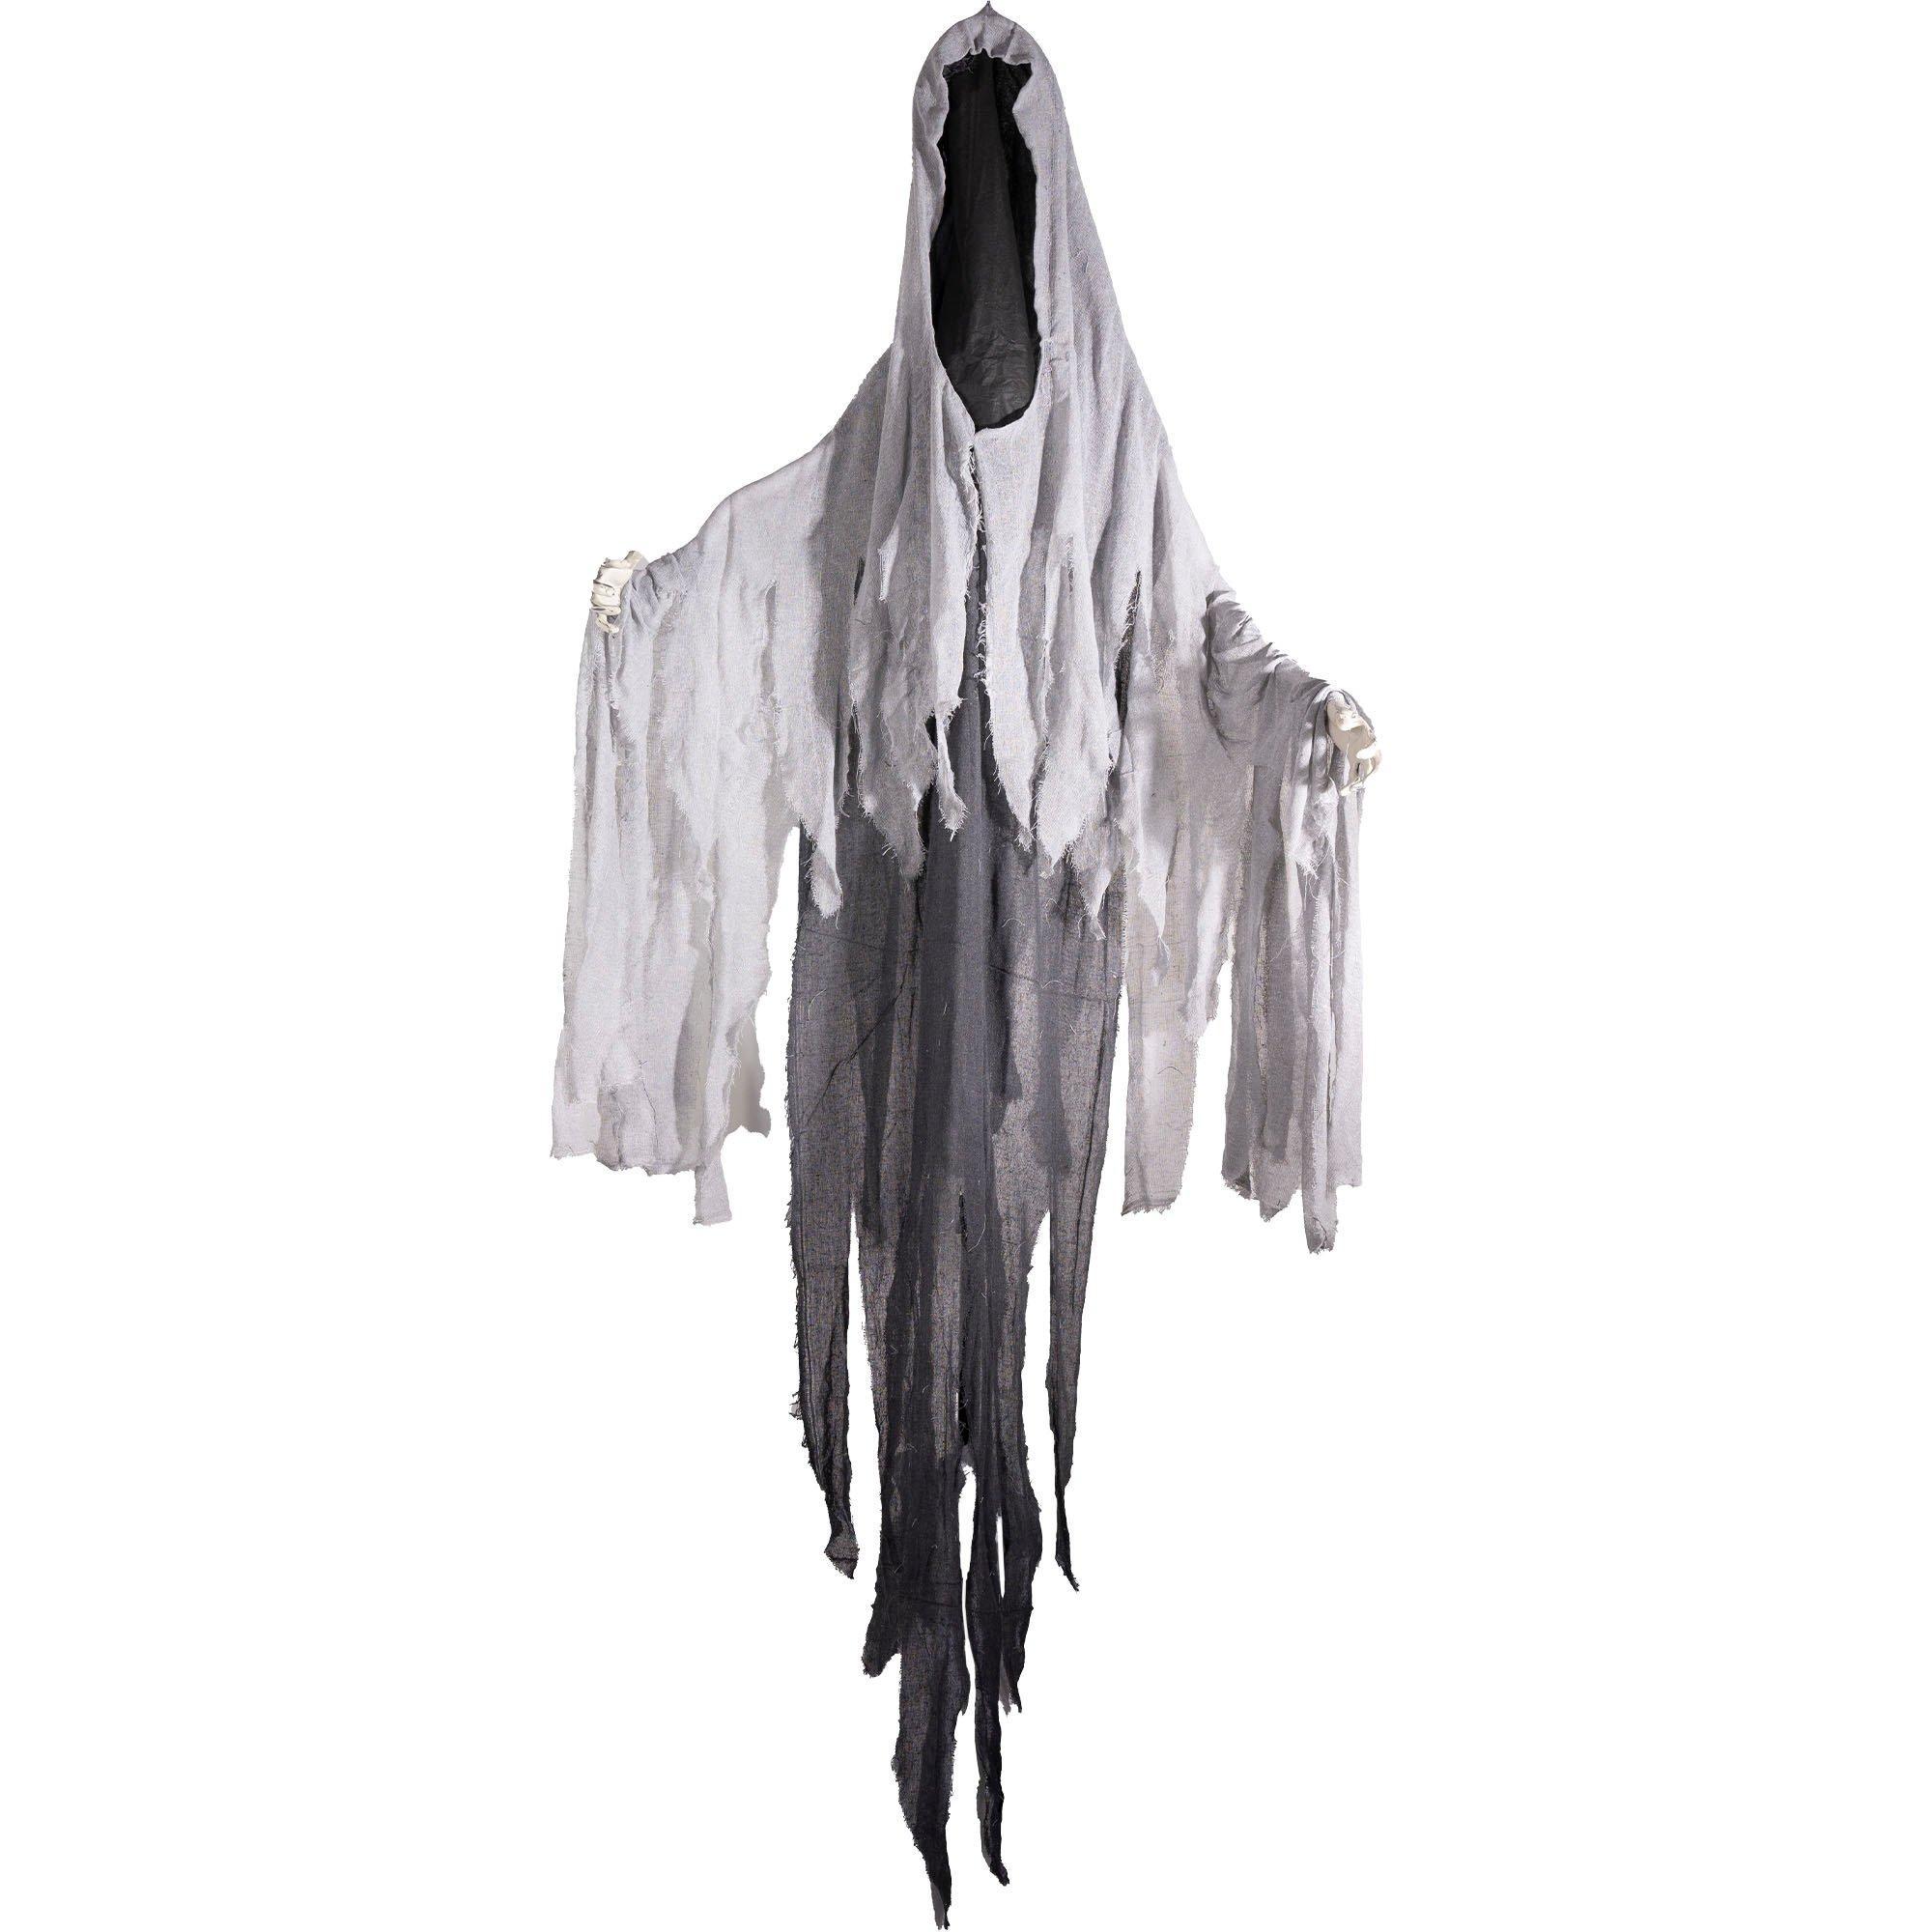 Faceless Ghost Hanging Halloween Decoration, 9ft | Party City